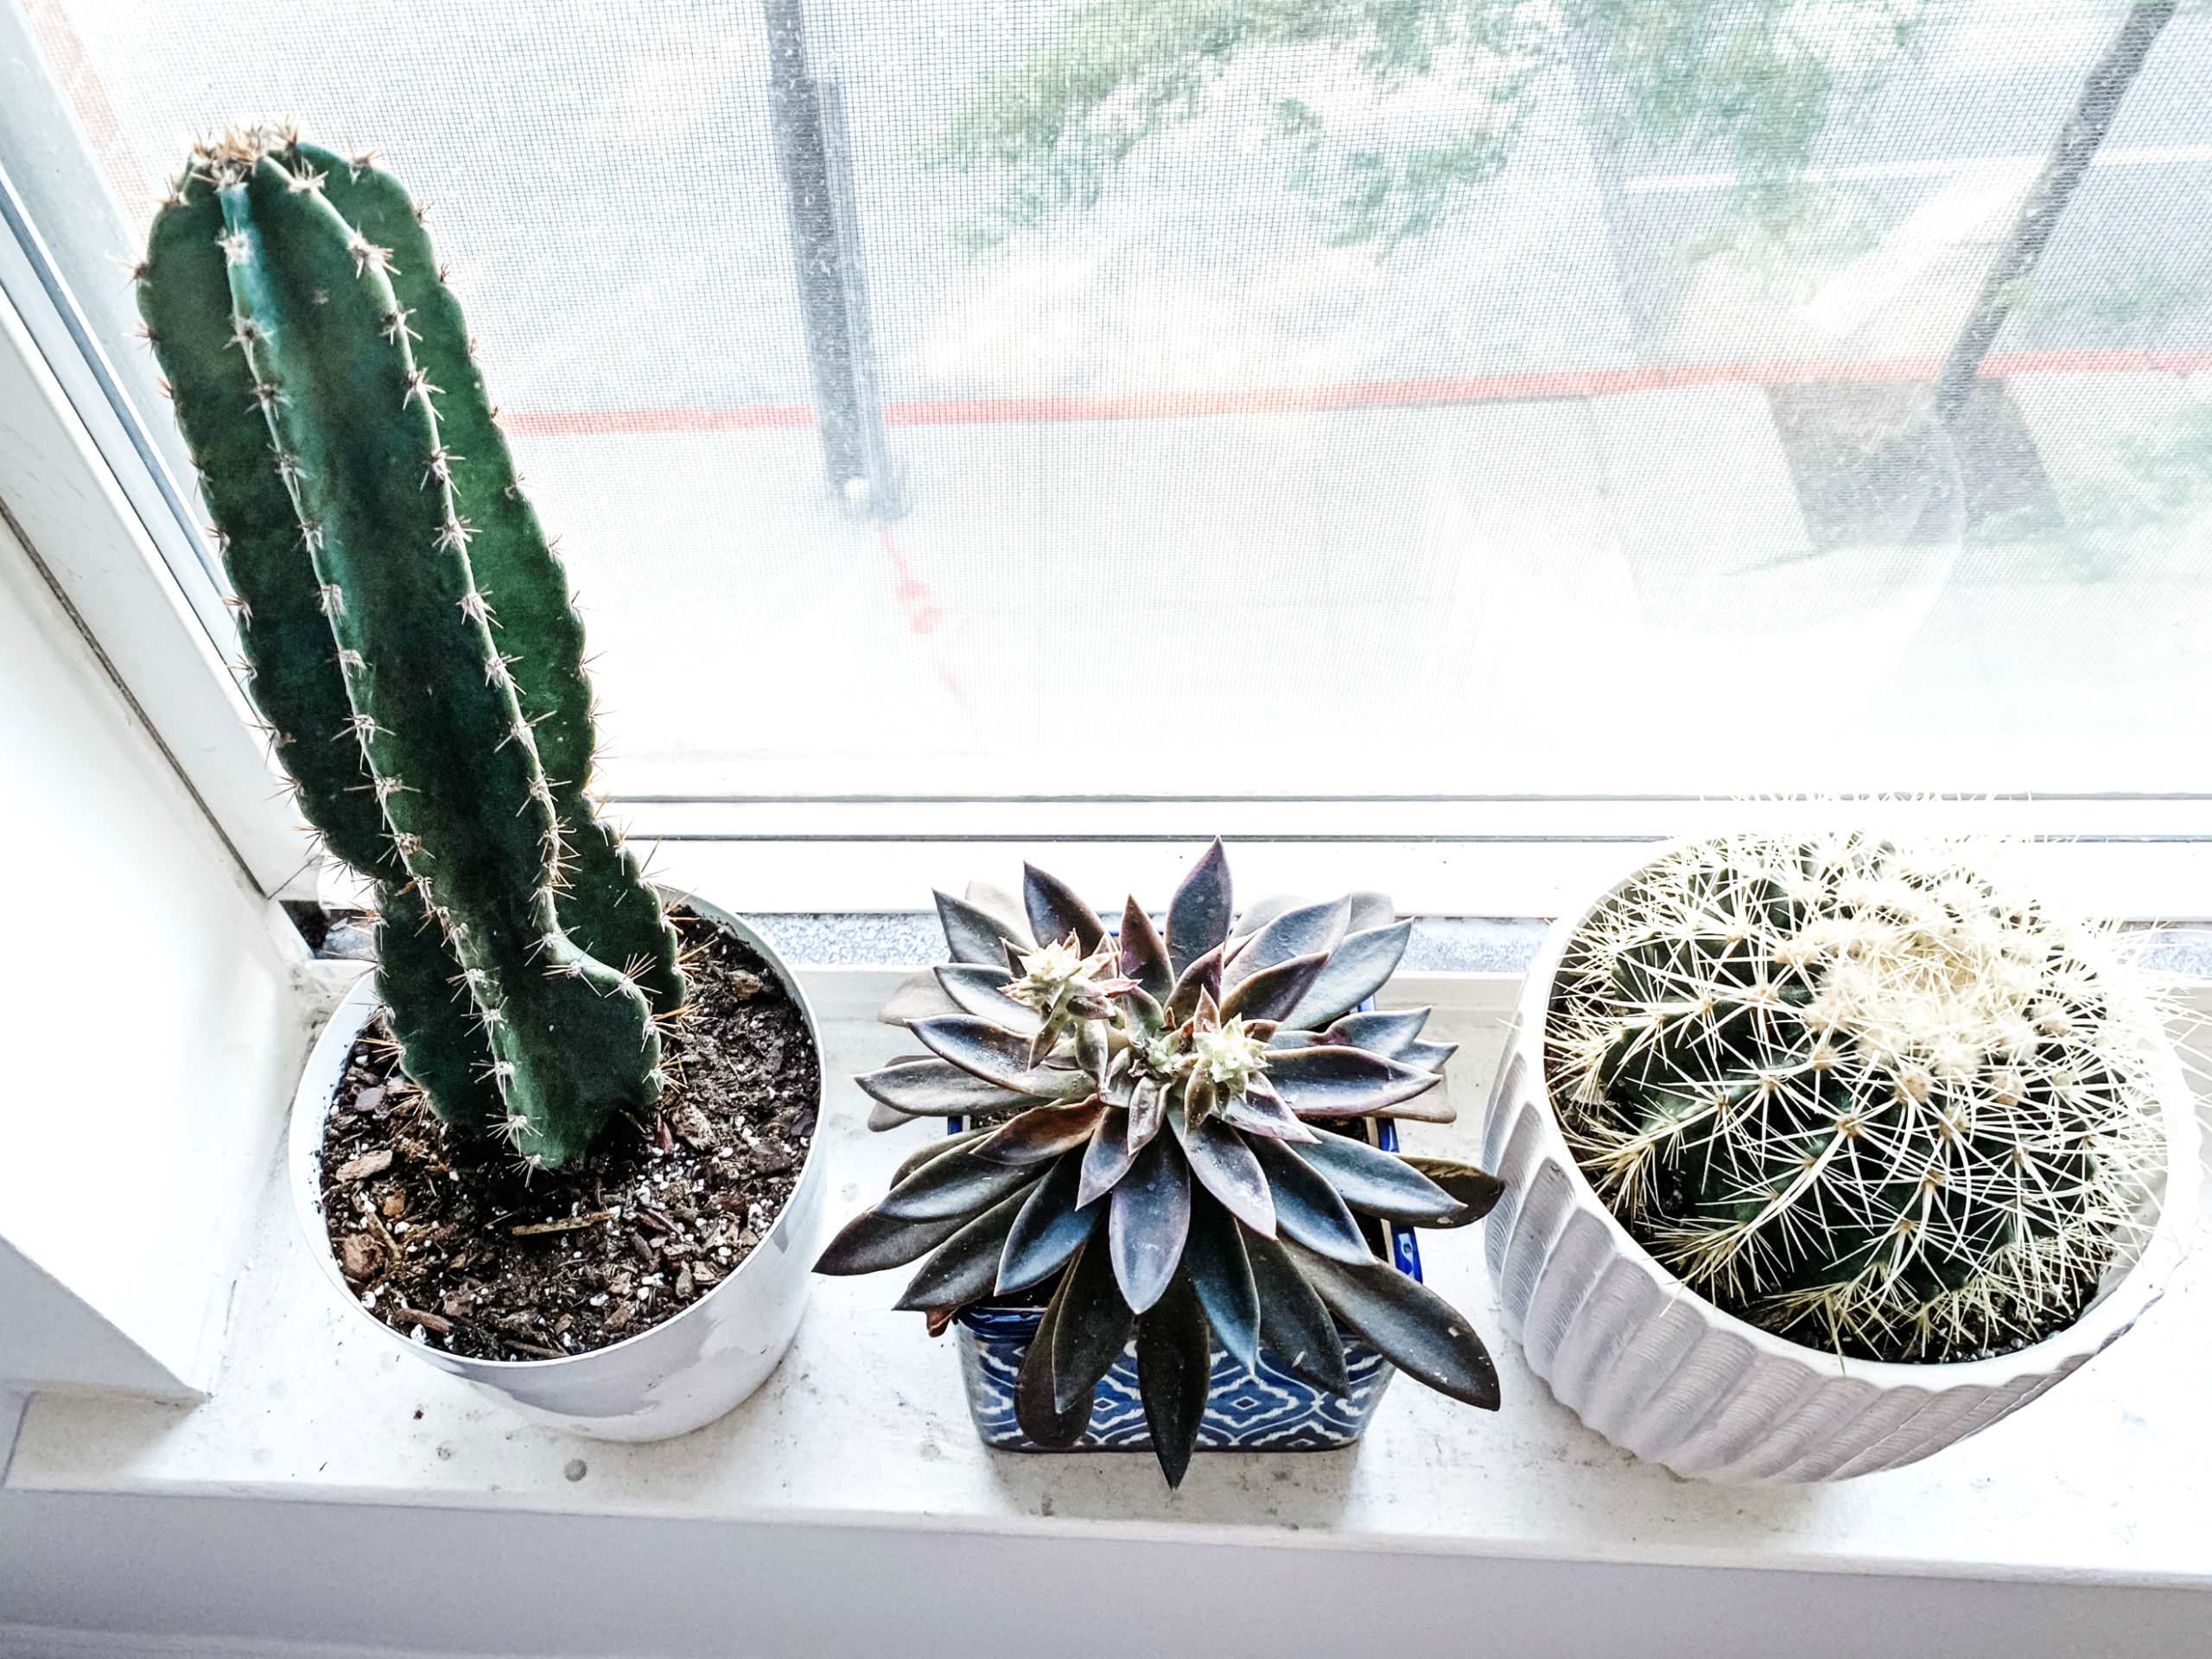 Clean Cactus and Succulents Using Compressed Air